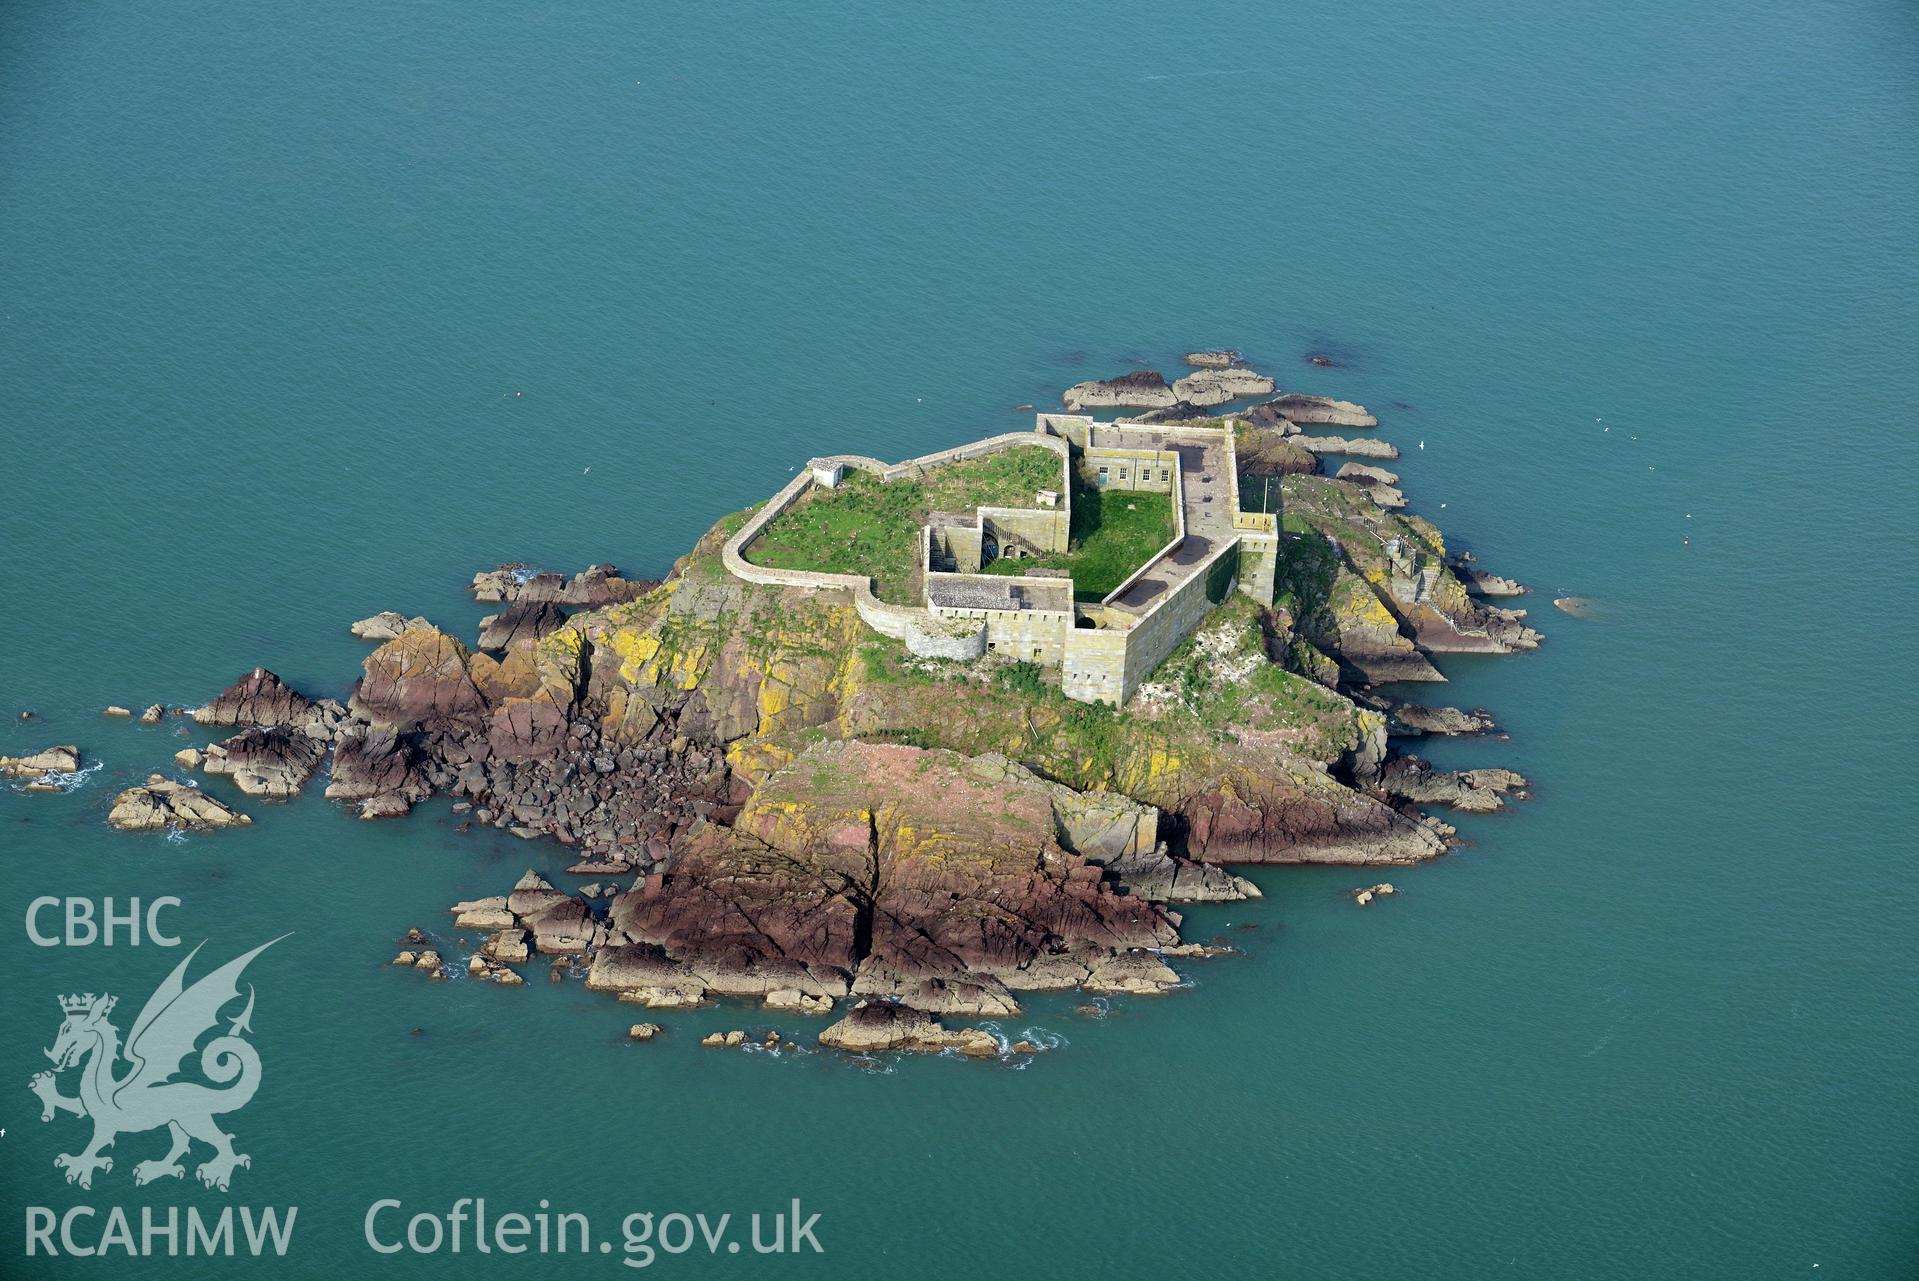 Aerial photography of Thorn Island taken on 27th March 2017. Baseline aerial reconnaissance survey for the CHERISH Project. ? Crown: CHERISH PROJECT 2017. Produced with EU funds through the Ireland Wales Co-operation Programme 2014-2020. All material made freely available through the Open Government Licence.